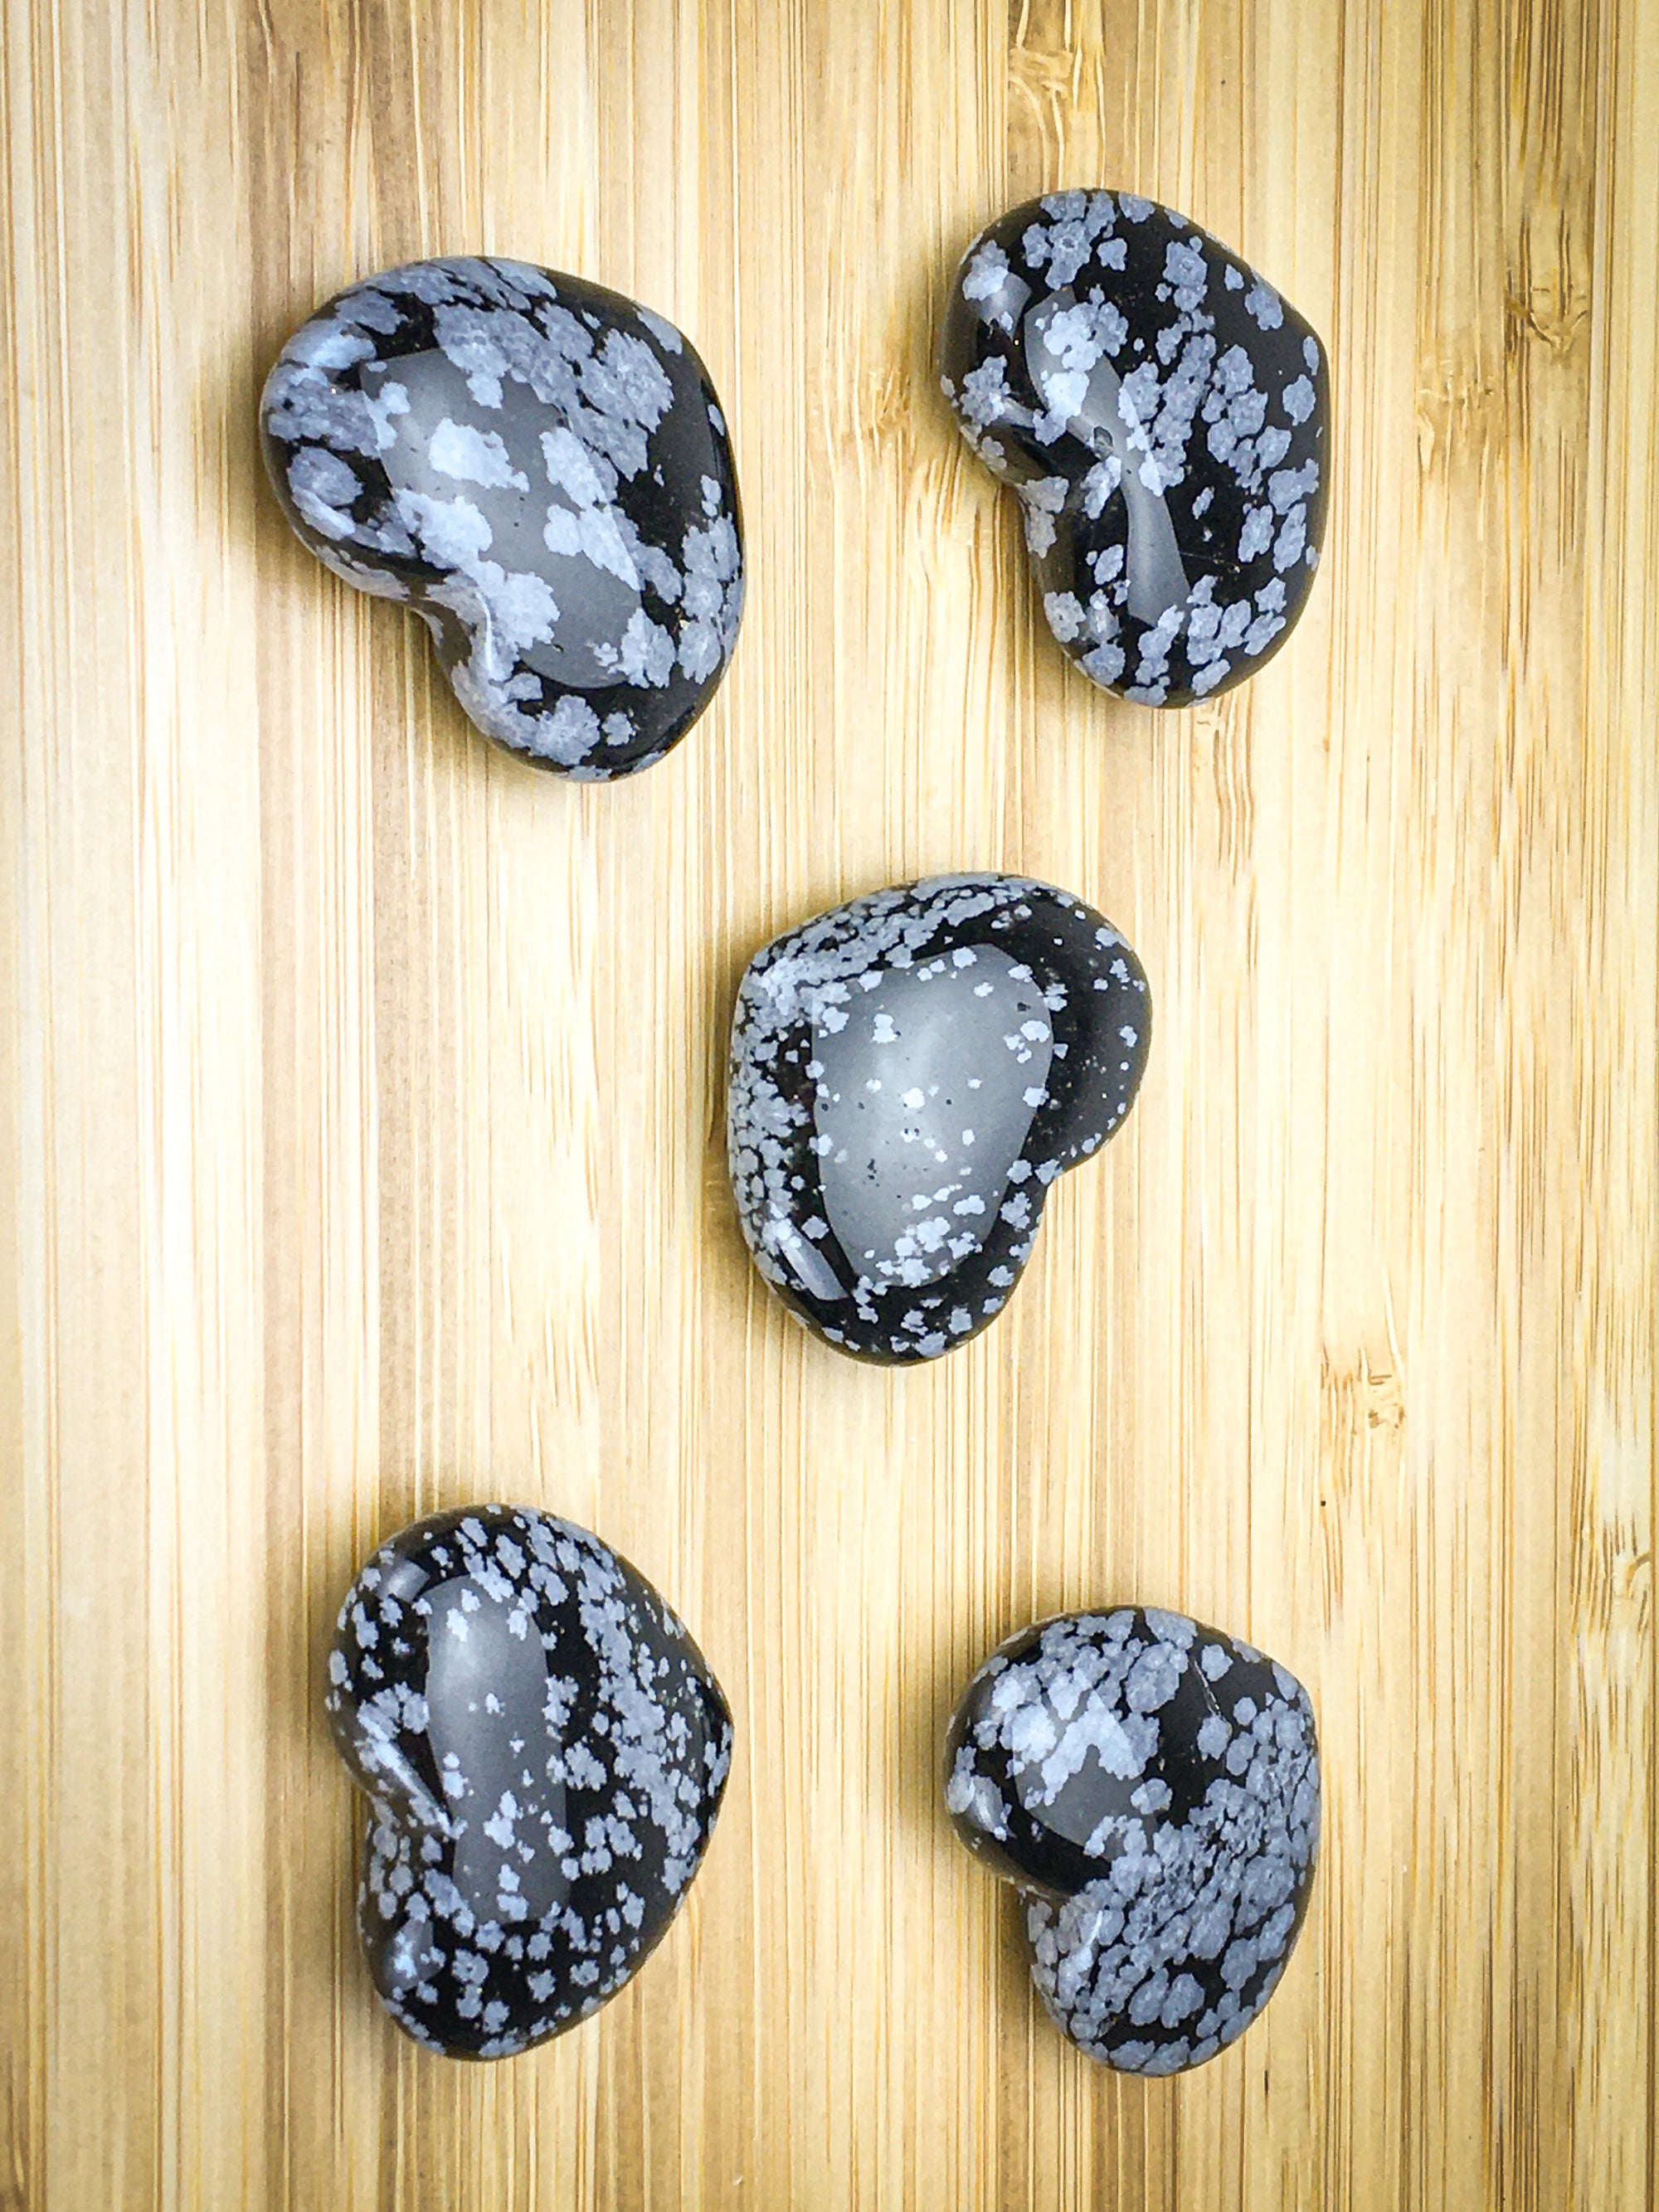 Five snowflake obsidian hearts on a light wood grain surface